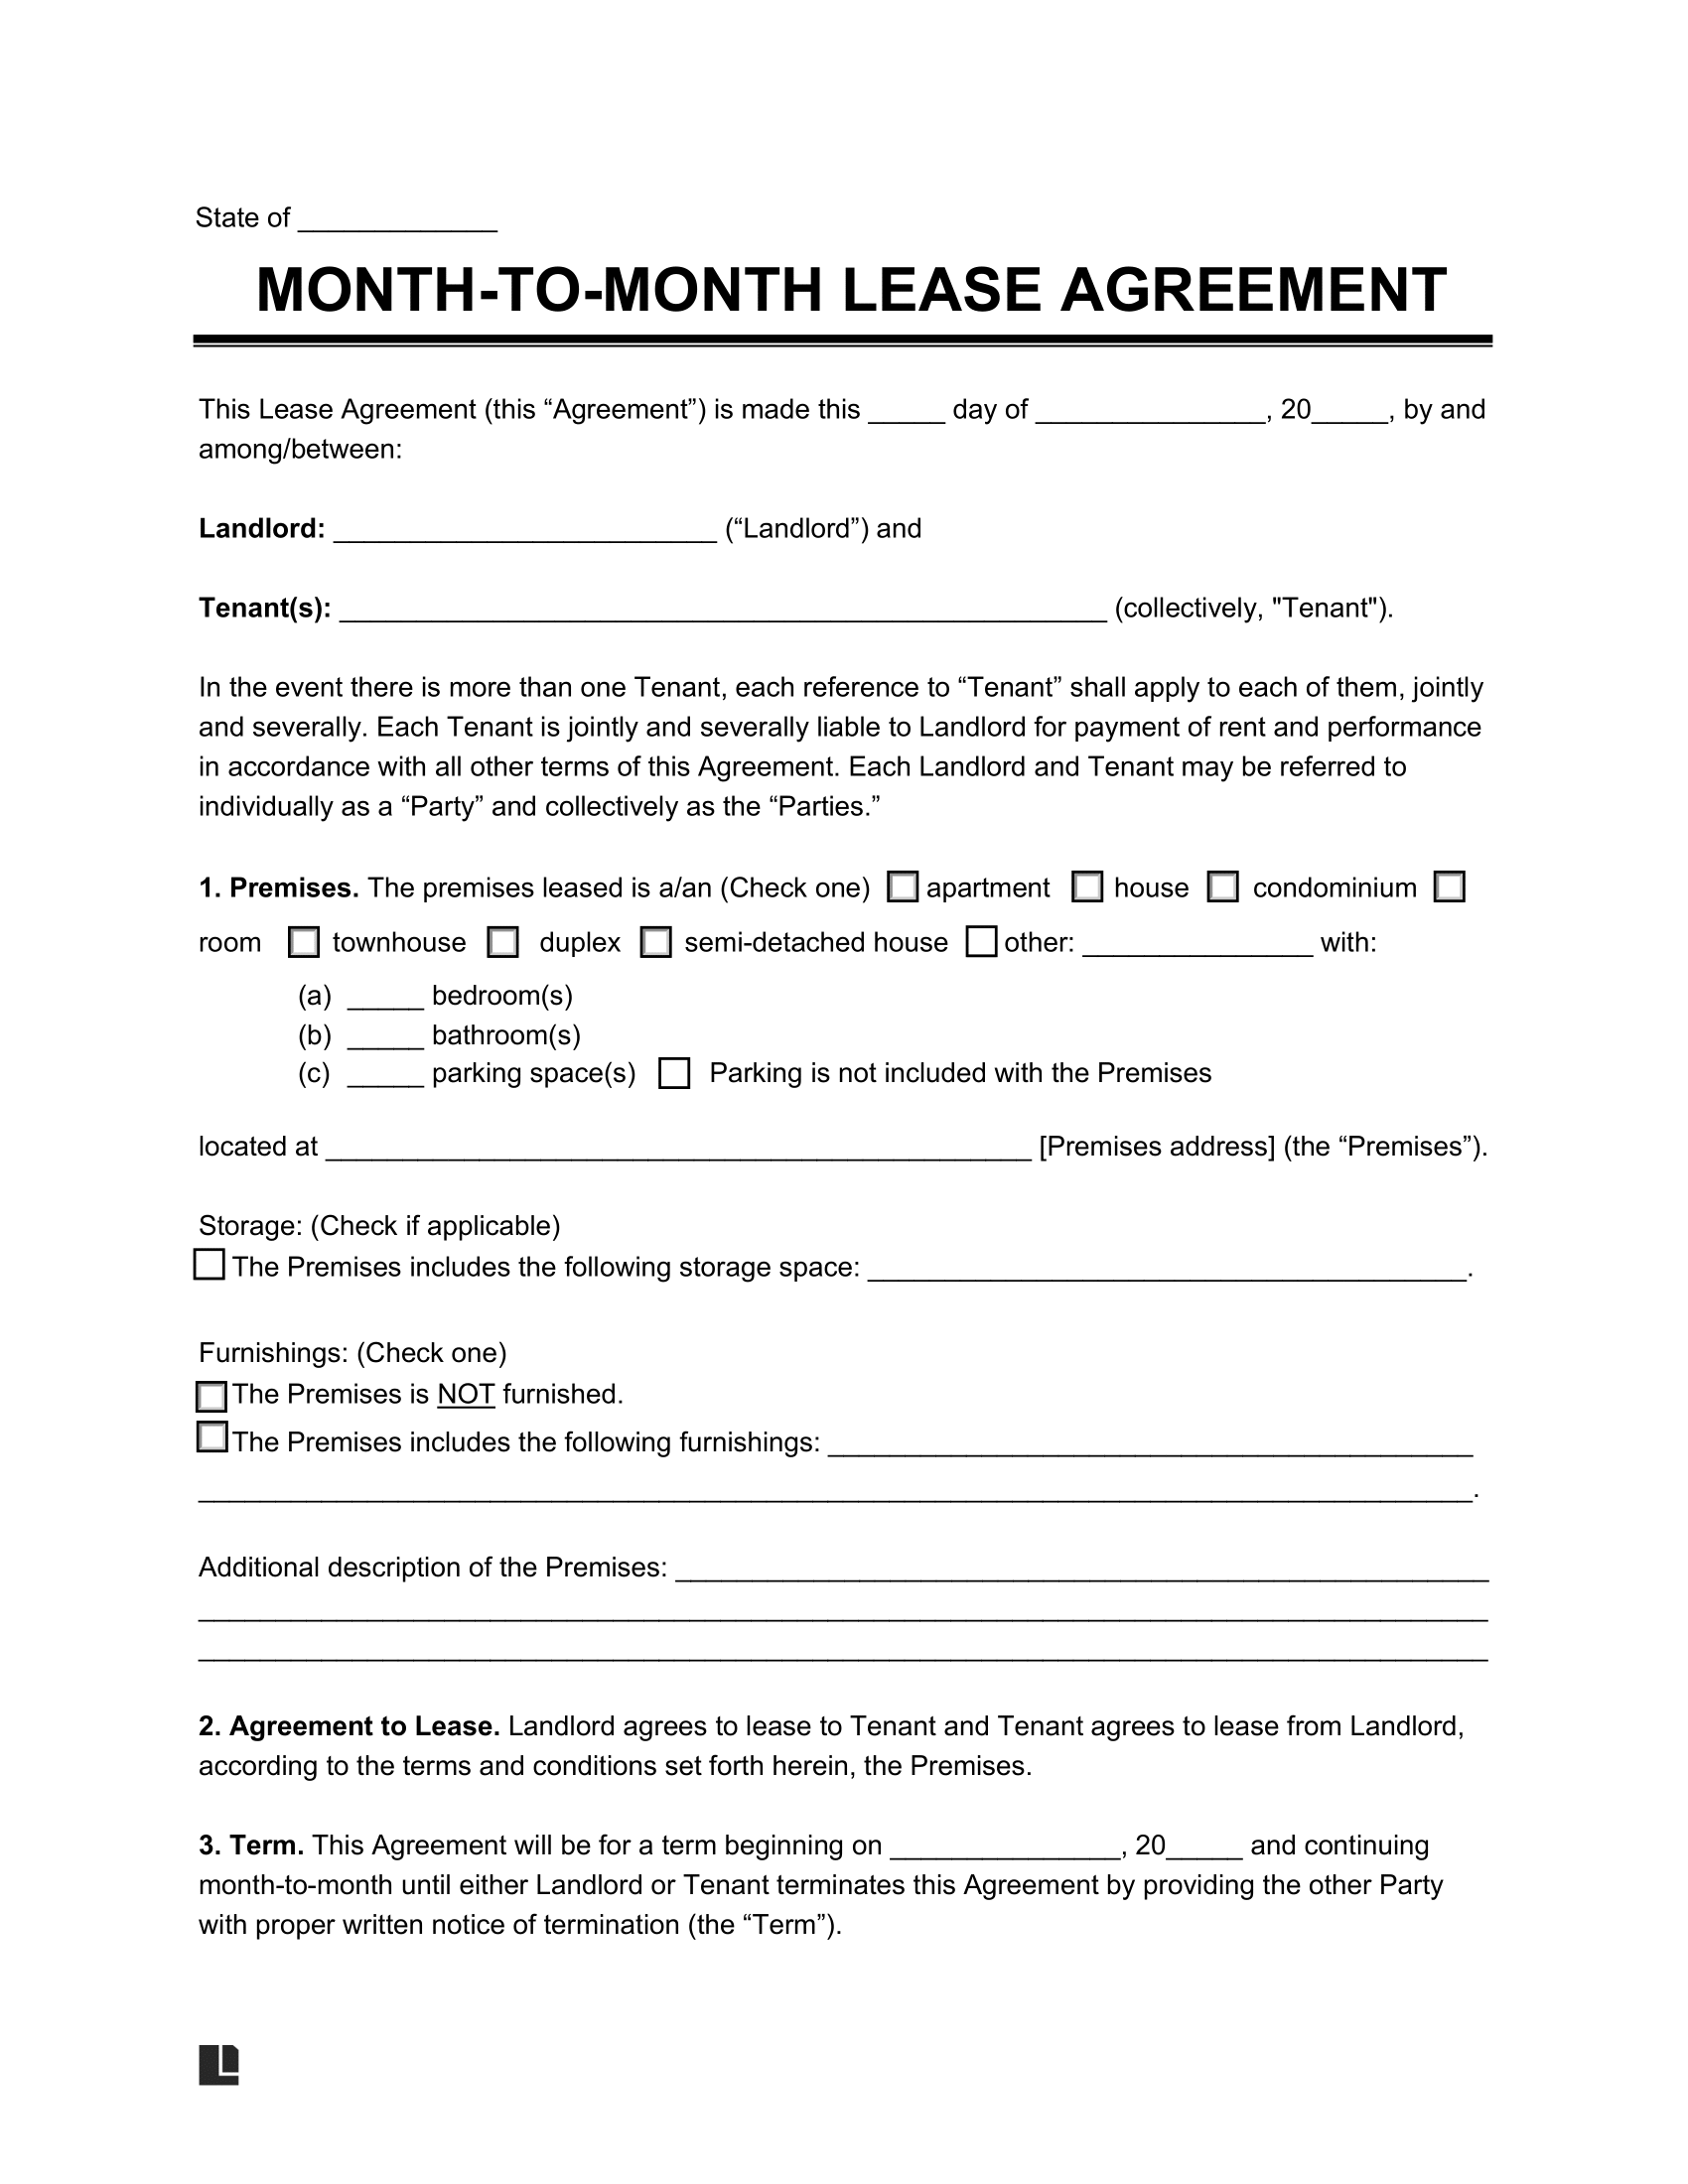 month to month residential lease agreement template